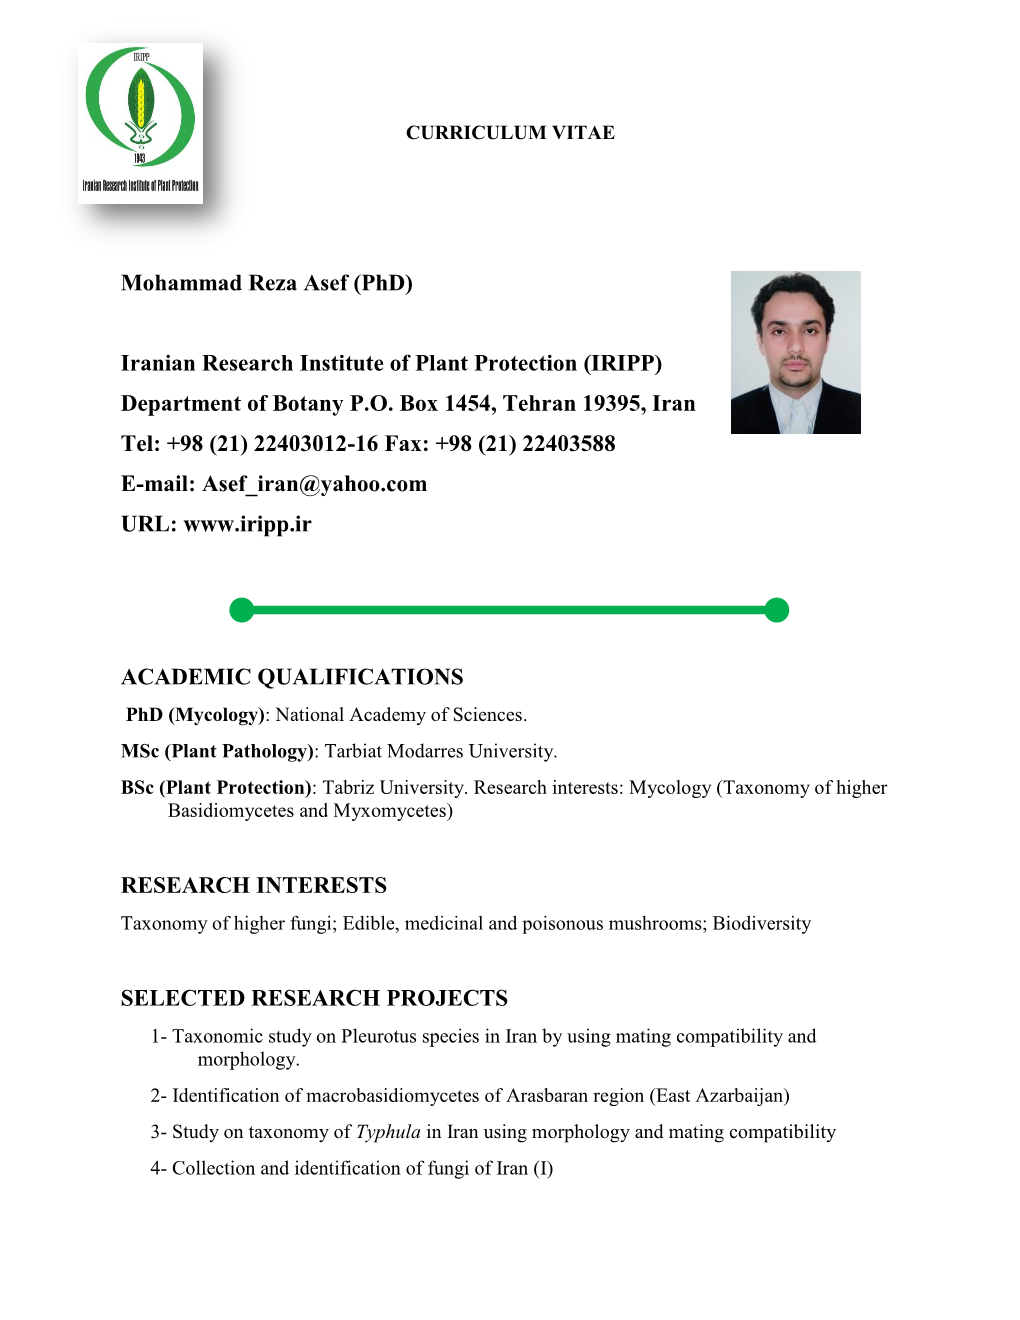 Mohammad Reza Asef (Phd) Iranian Research Institute of Plant Protection (IRIPP) Department of Botany P.O. Box 1454, Tehran